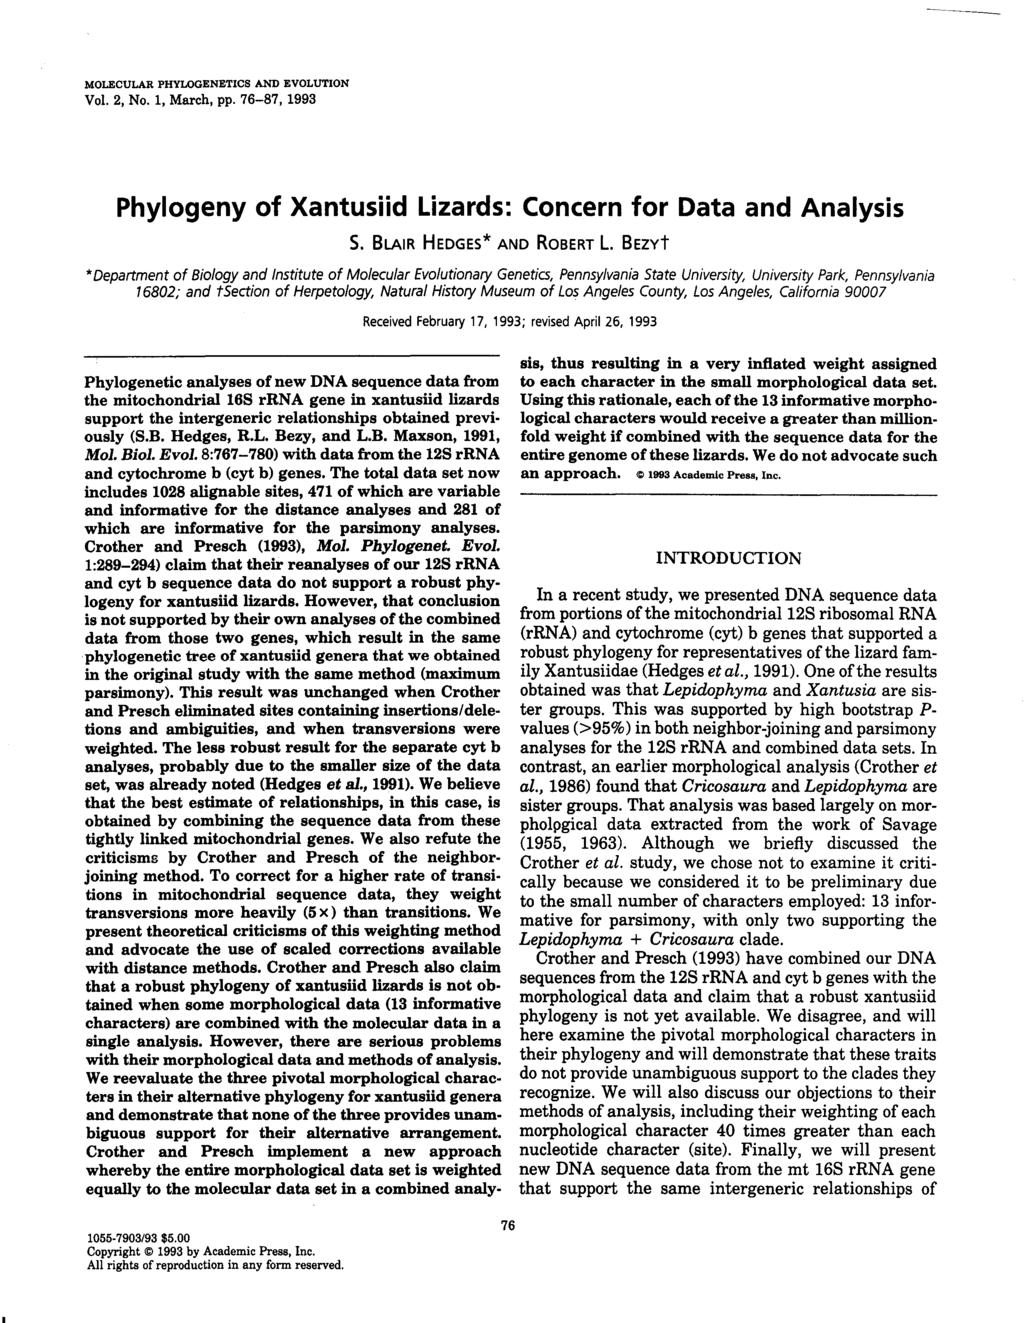 MOLECULAR PHYLOGENETICS AND EVOLUTION Vol. 2, No.1, March, pp. 76-87, 1993 Phylogeny of Xantusiid Lizards: Concern for Data and Analysis S. BLAIR HEDGES* AND ROBERT L.